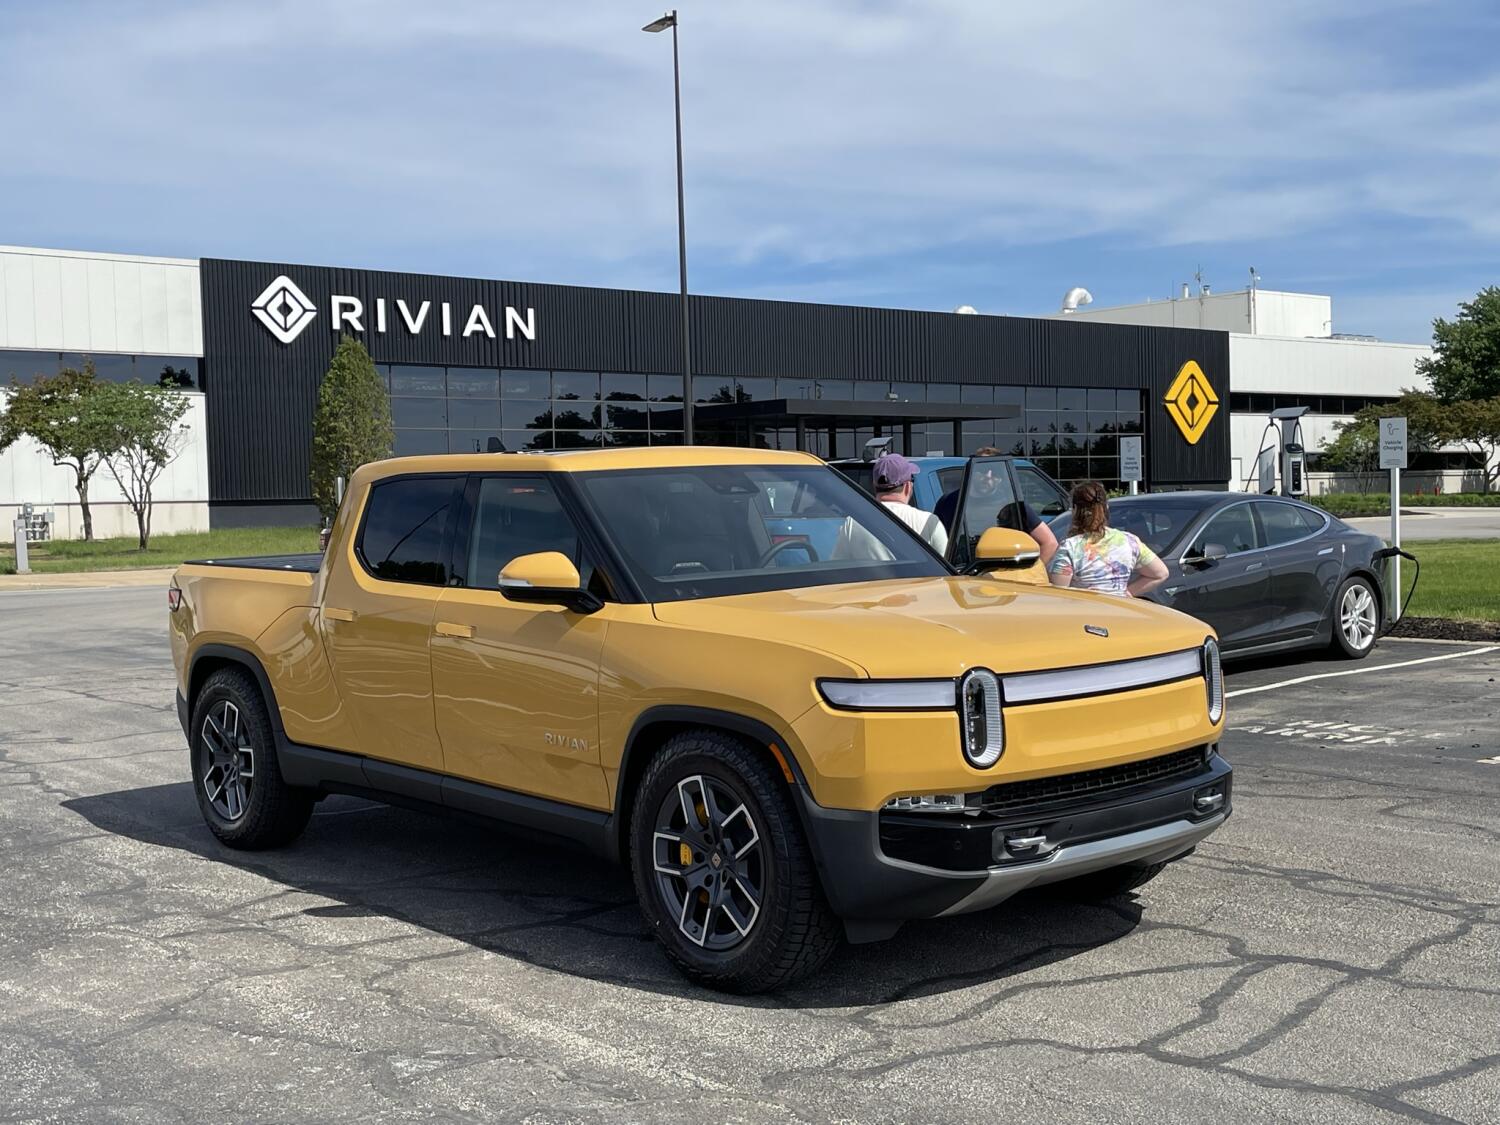 EV maker Rivian gets up to $5-billion infusion from Volkswagen